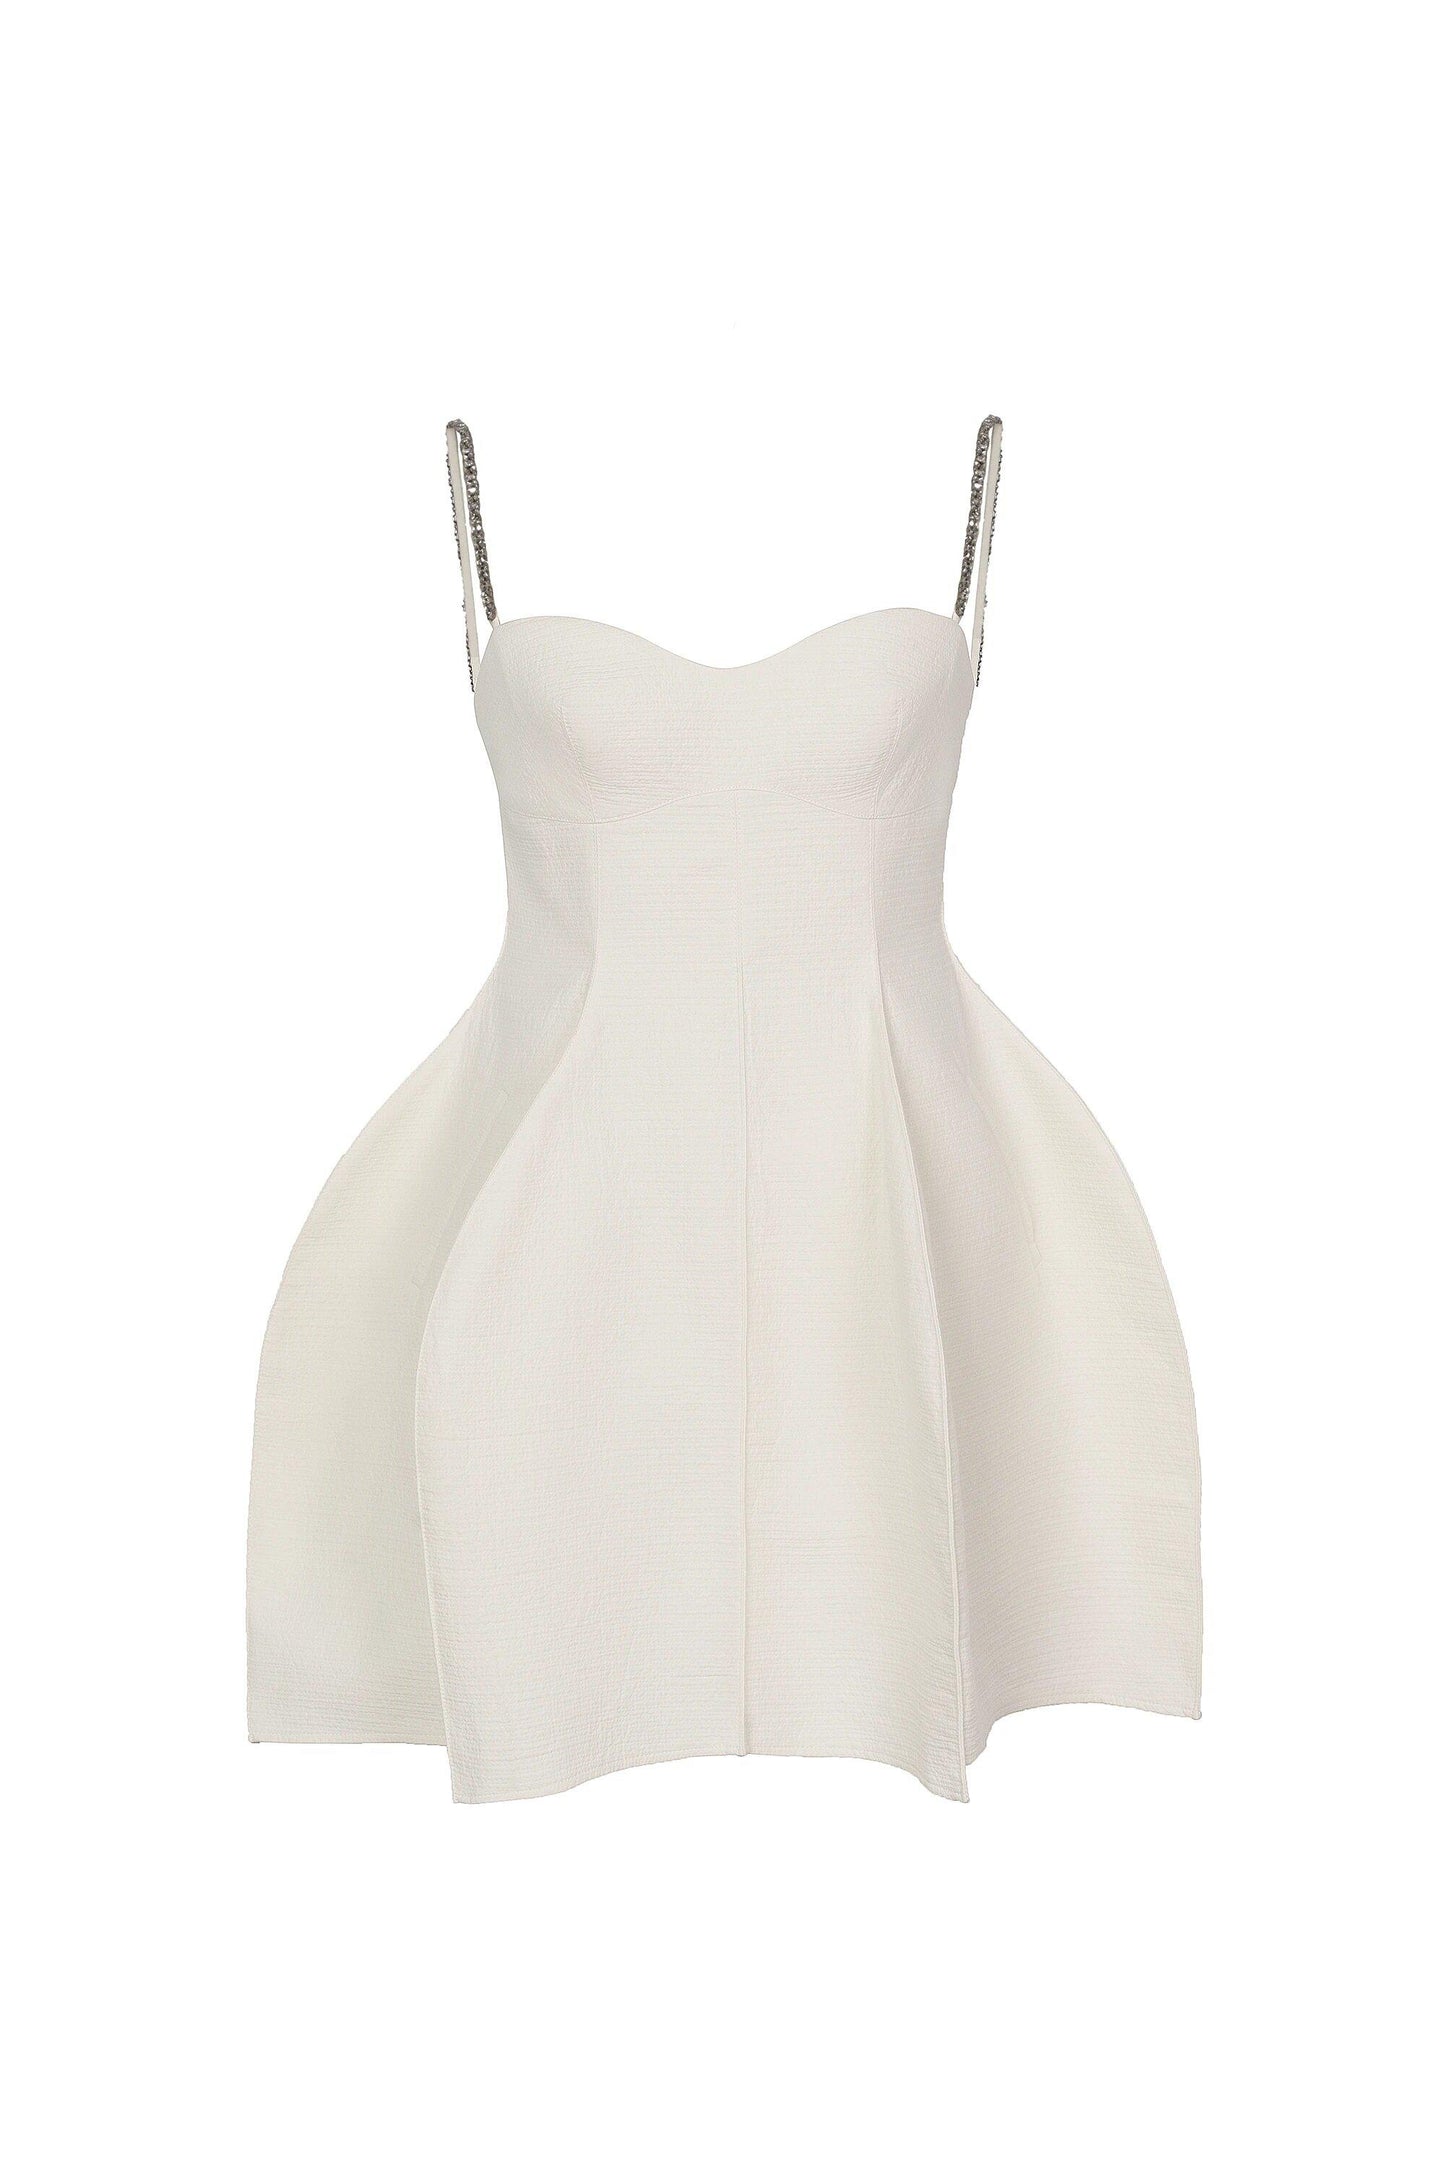 Sweat heart neck cocoon structured cocktail skater princess dress-soline